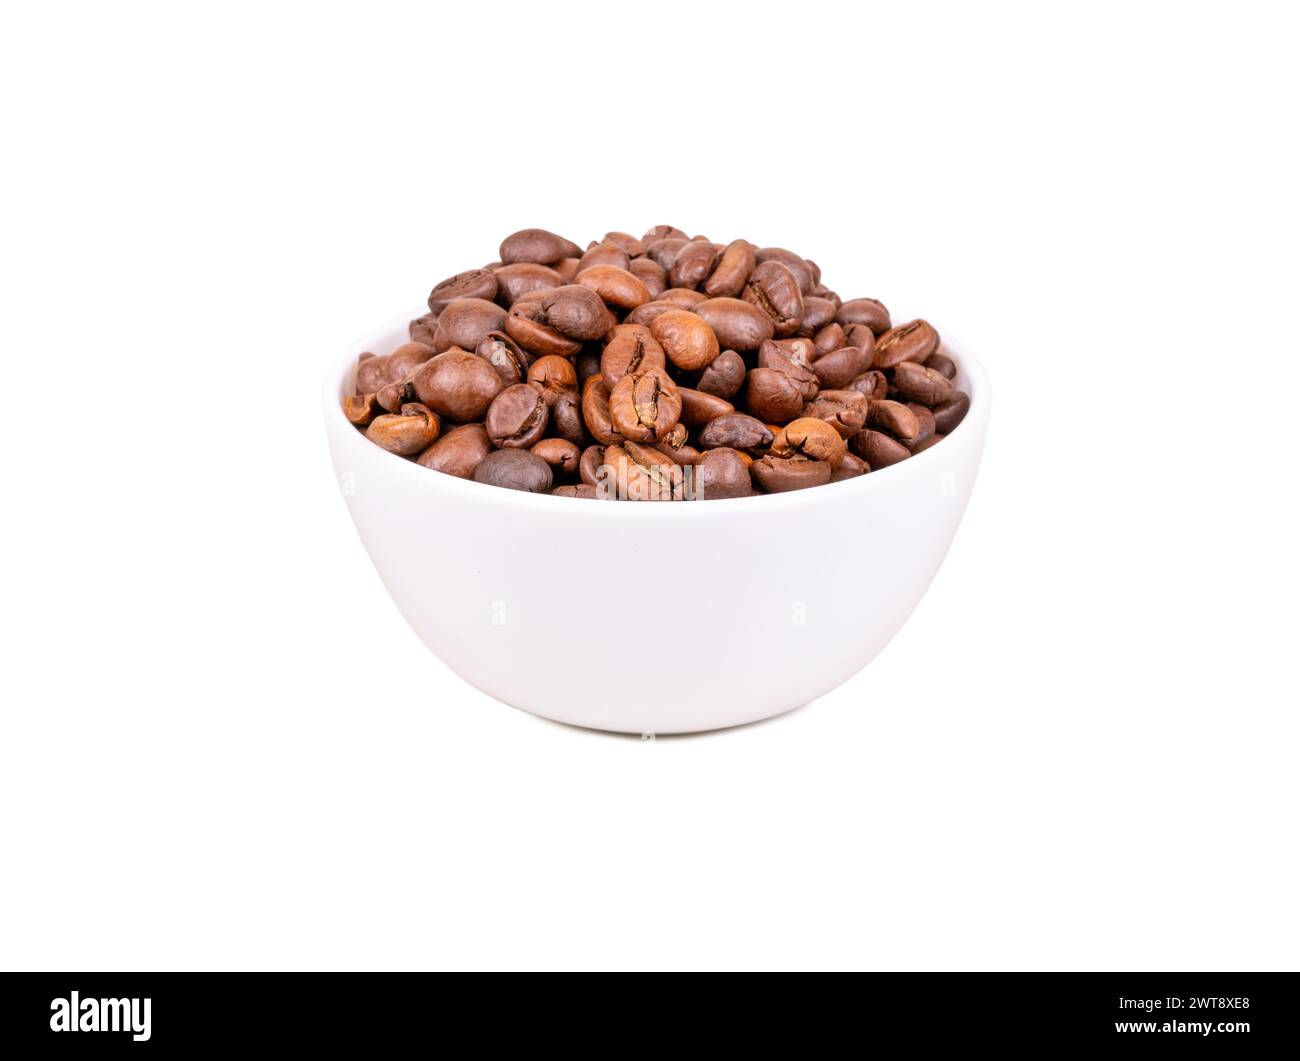 Roasting Arabica coffee beans in a light bowl isolated on white background Stock Photo